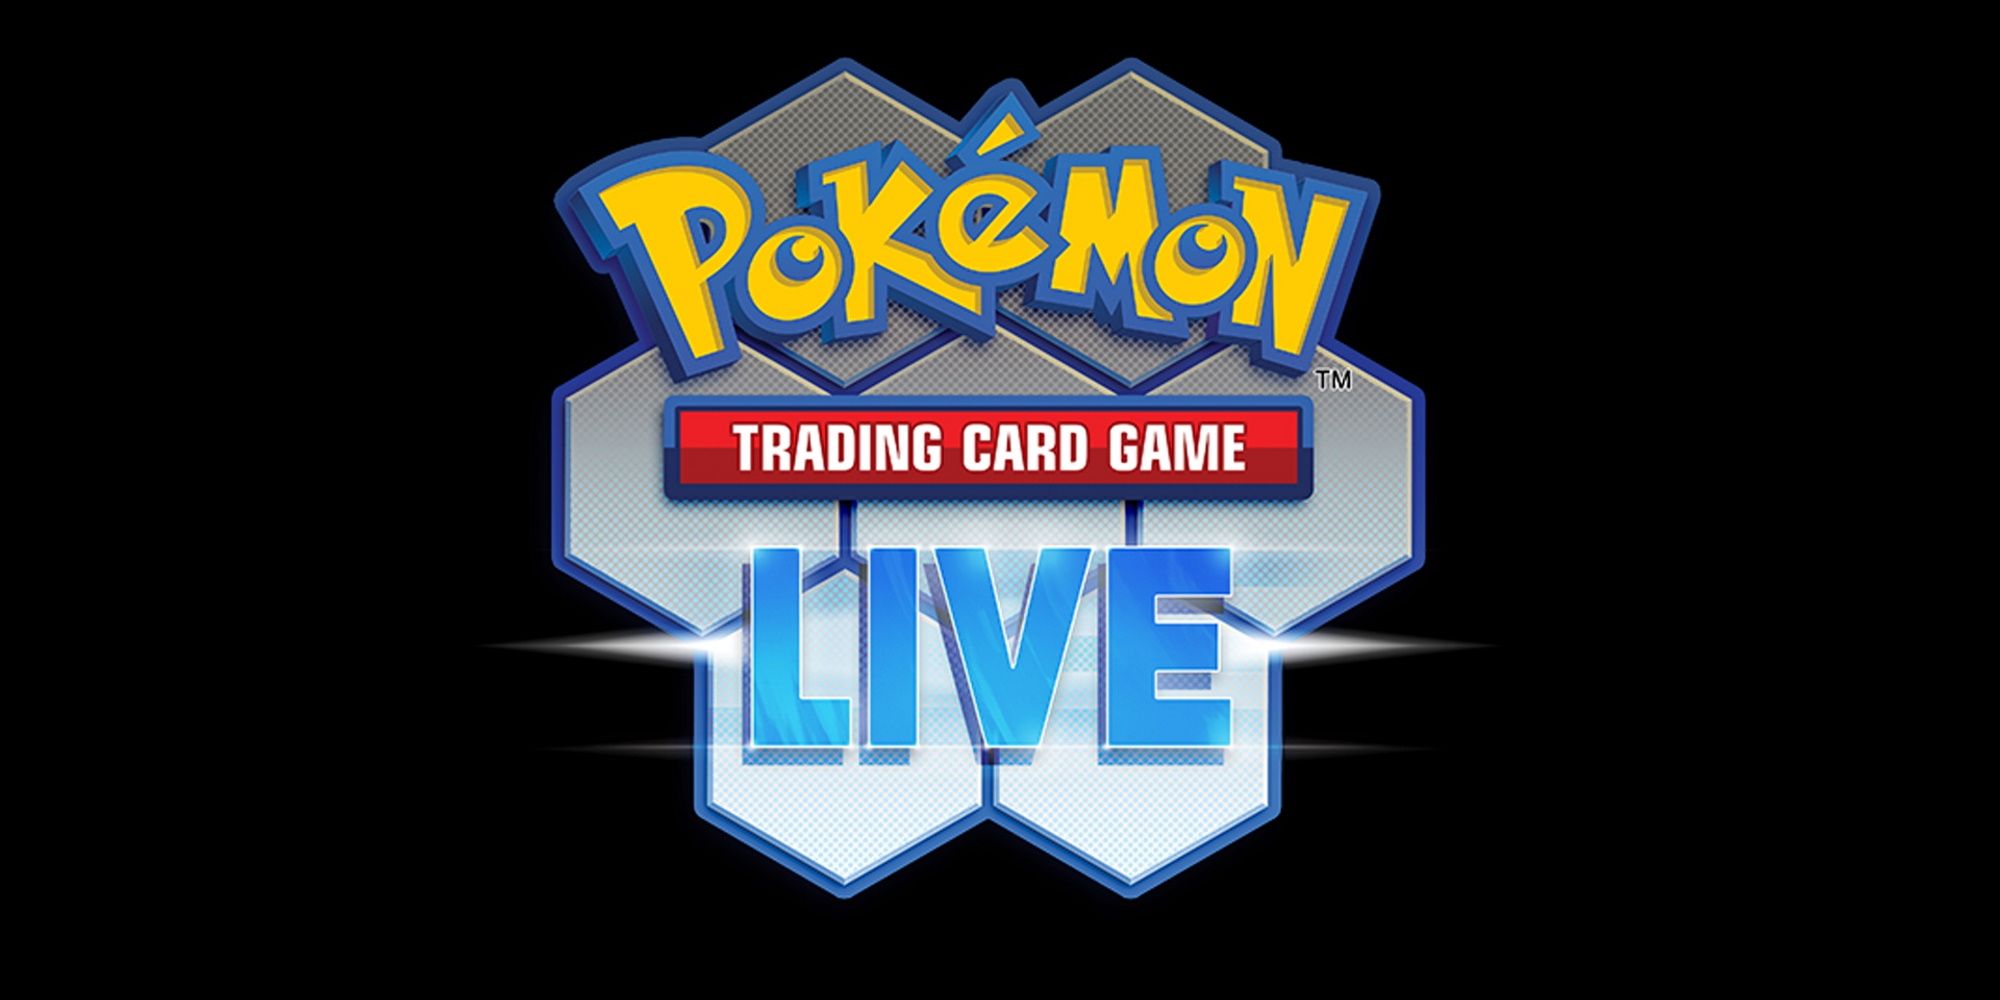 Pokemon TCG Live Beta Is Now Available Globally